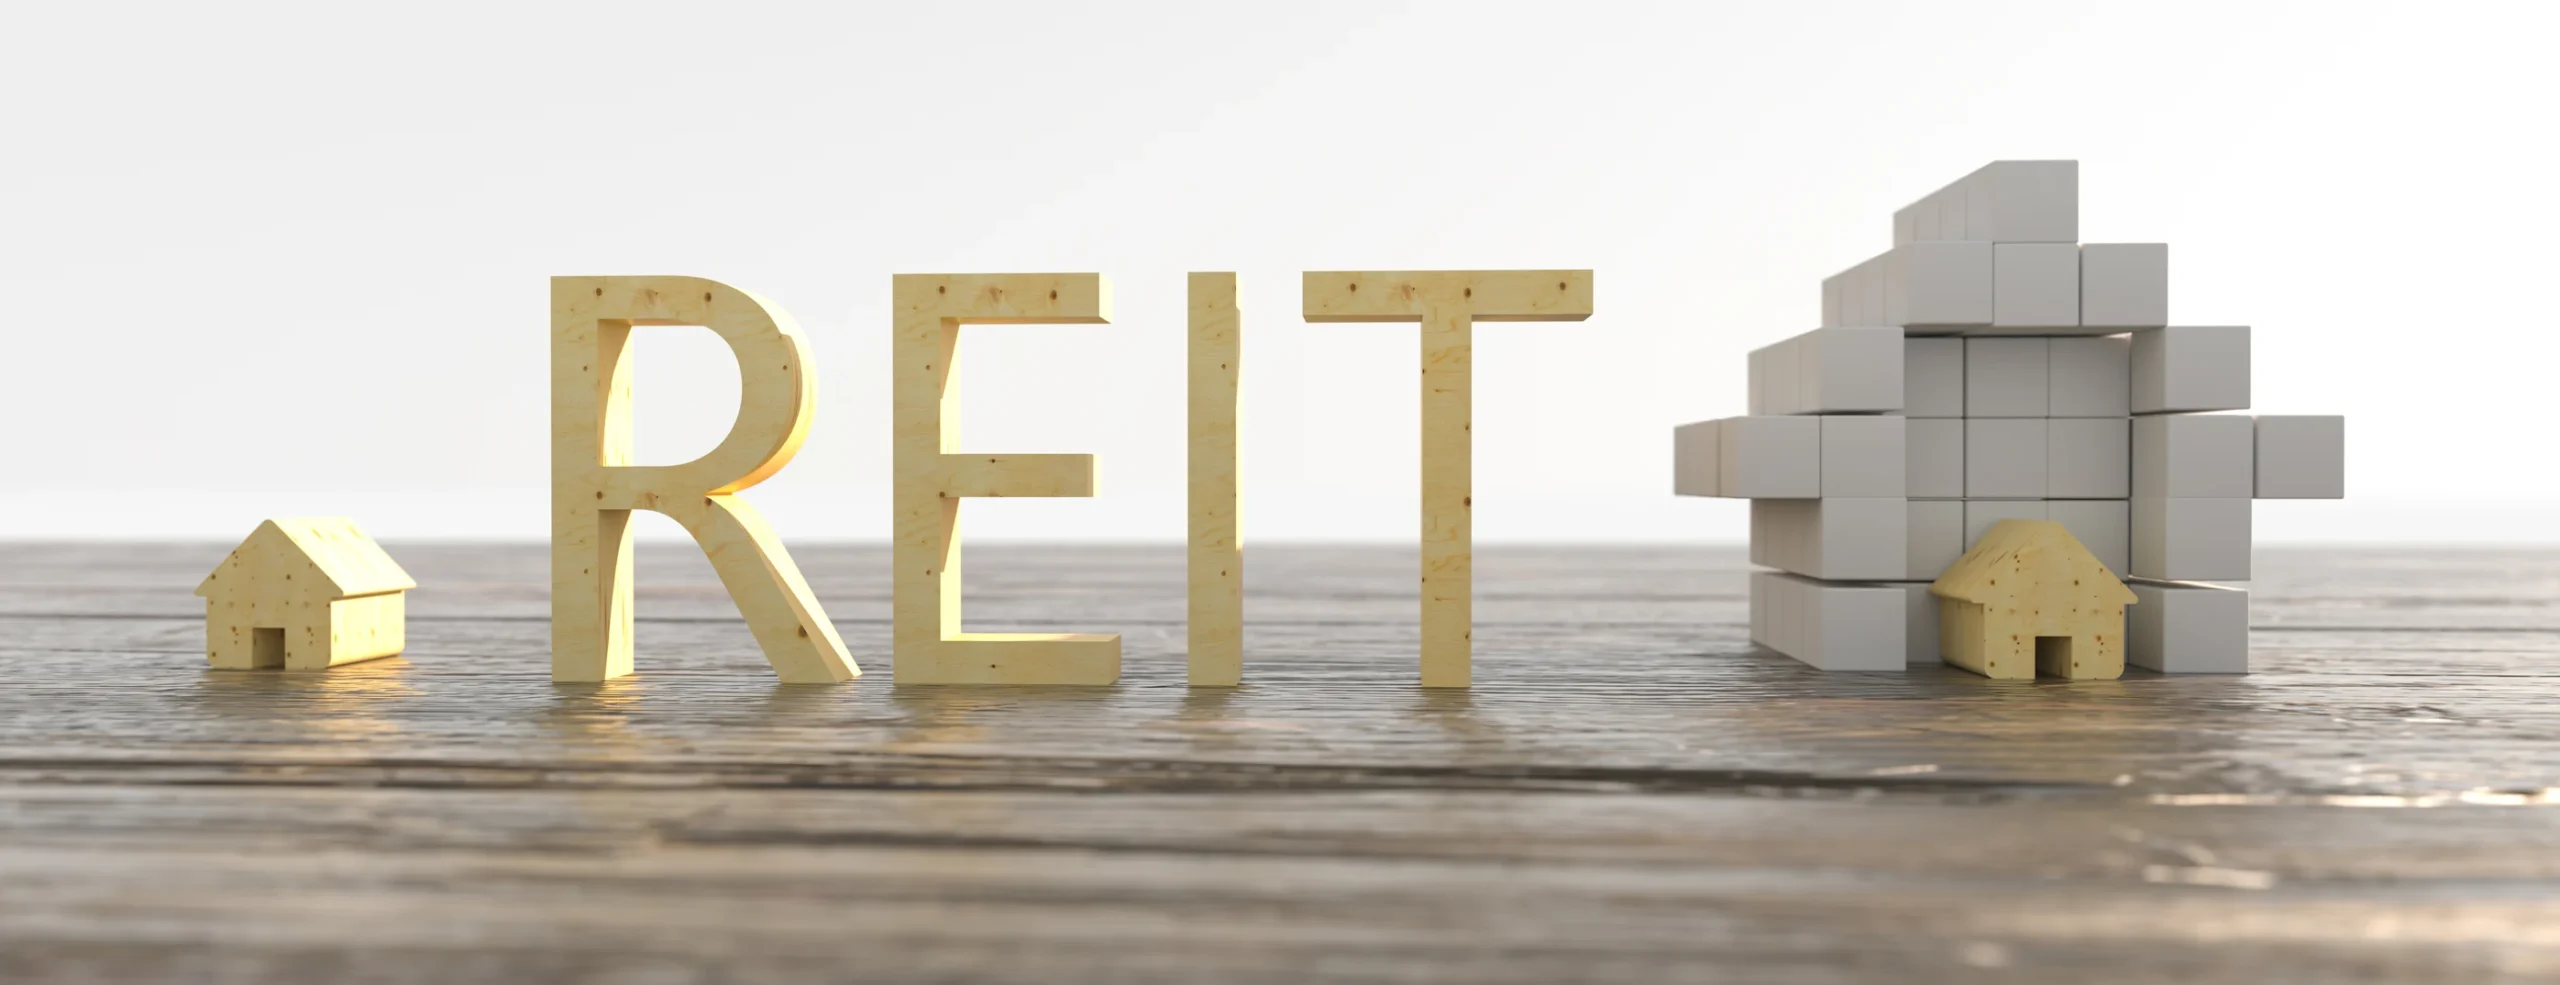 The image displays the word "REITs" formed with golden 3D letters, placed on a wooden surface. To the left of the text is a miniature house, and to the right is a structure made of white cube-shaped blocks with a golden house-shaped block at the top. | MONEY6X